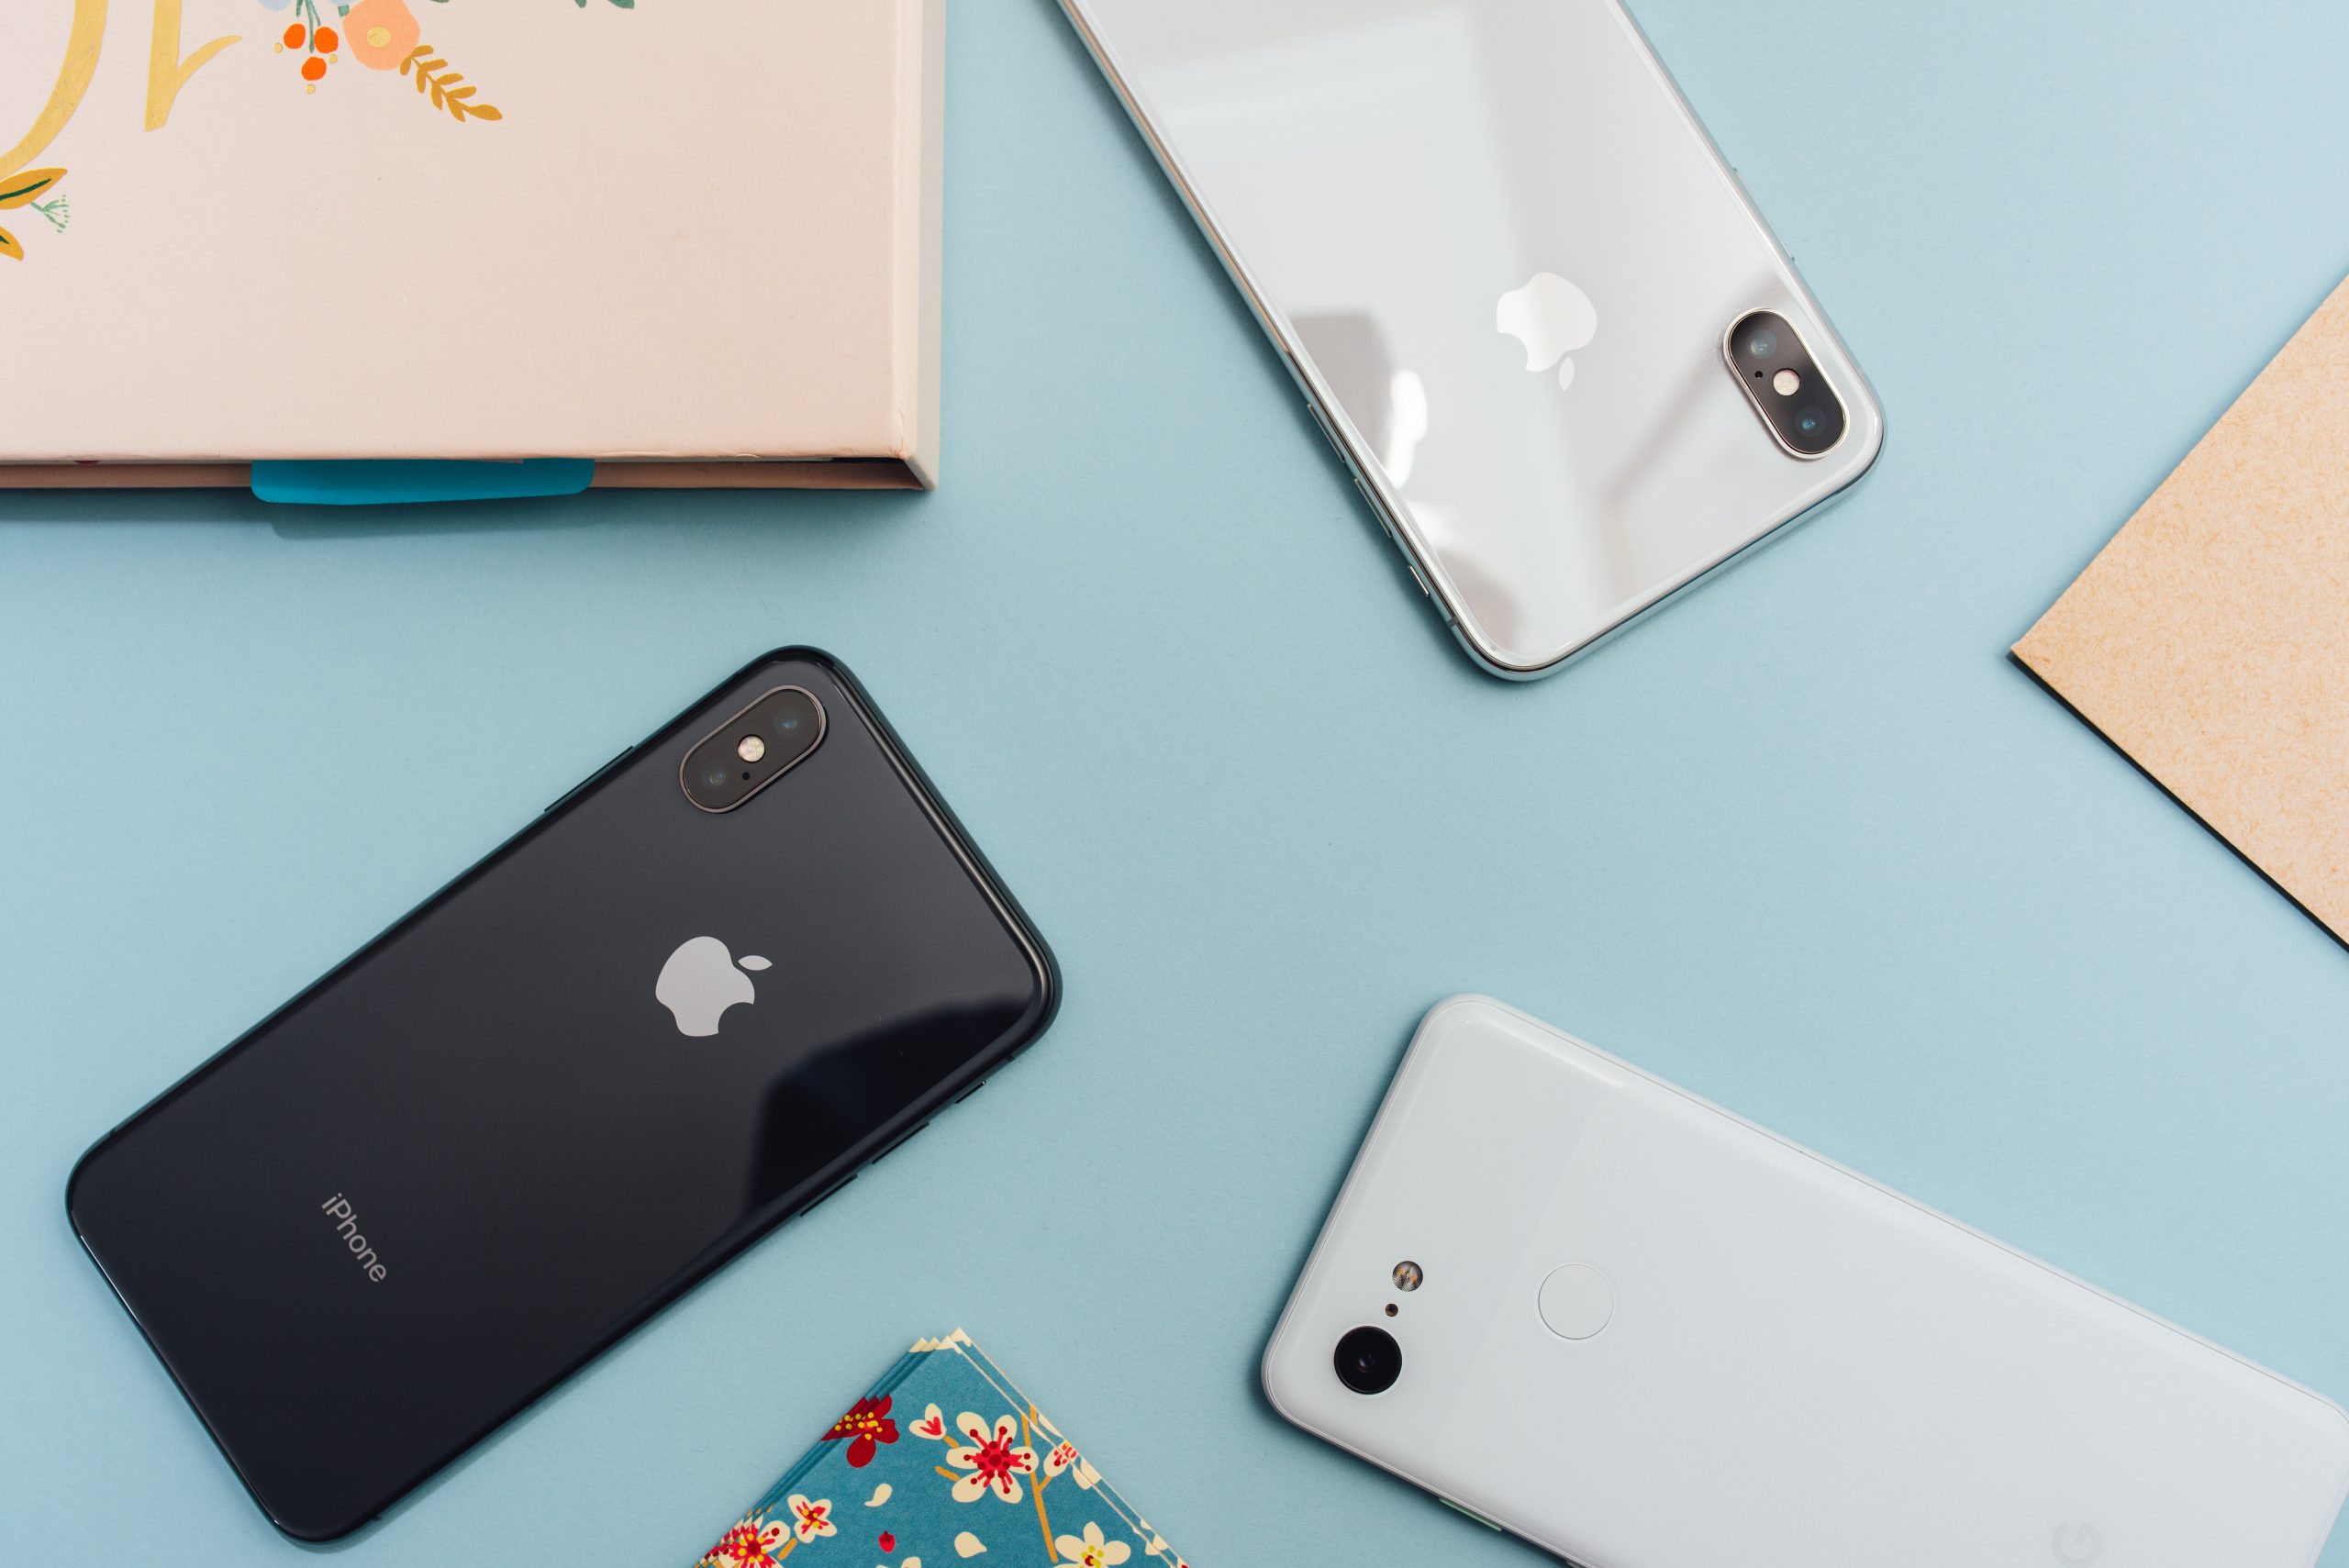 Planning an iPhone Purchase? Here Are 5 Things You Need to Know